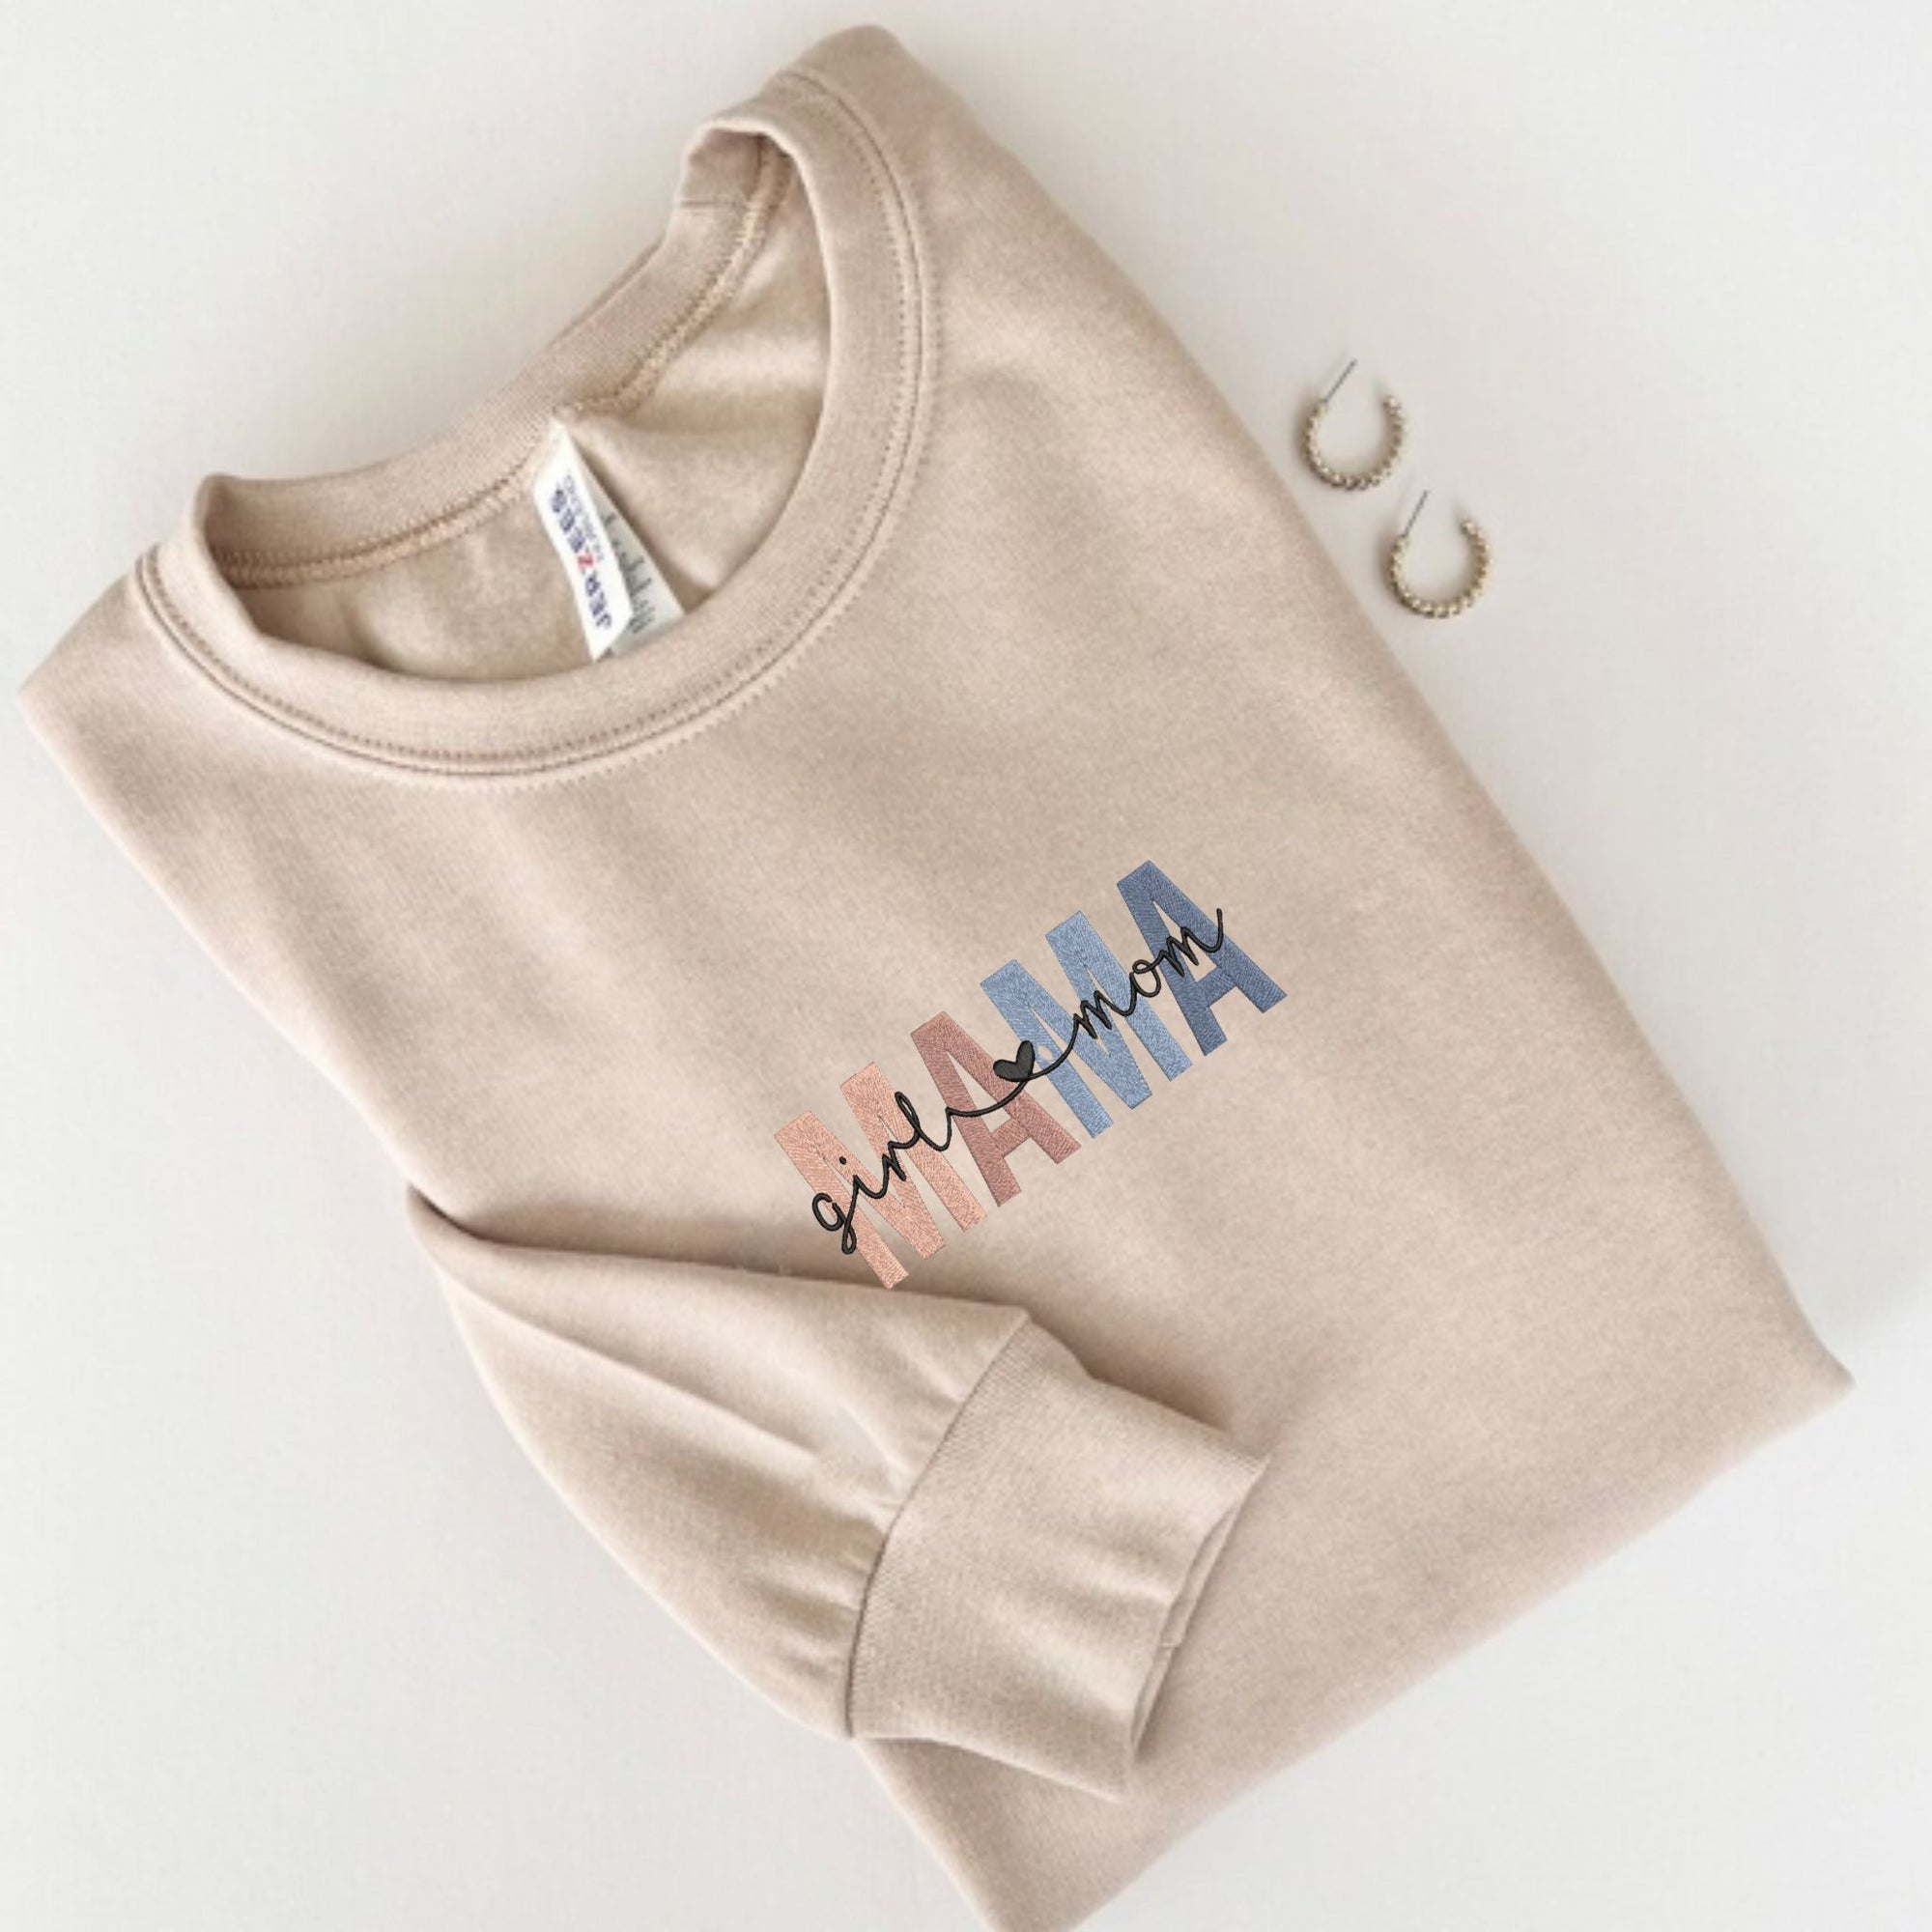 Boy Mama Embroidery Sweatshirt, Best Gift For Mother's Day From Son, Mother's Day Gift Ideas